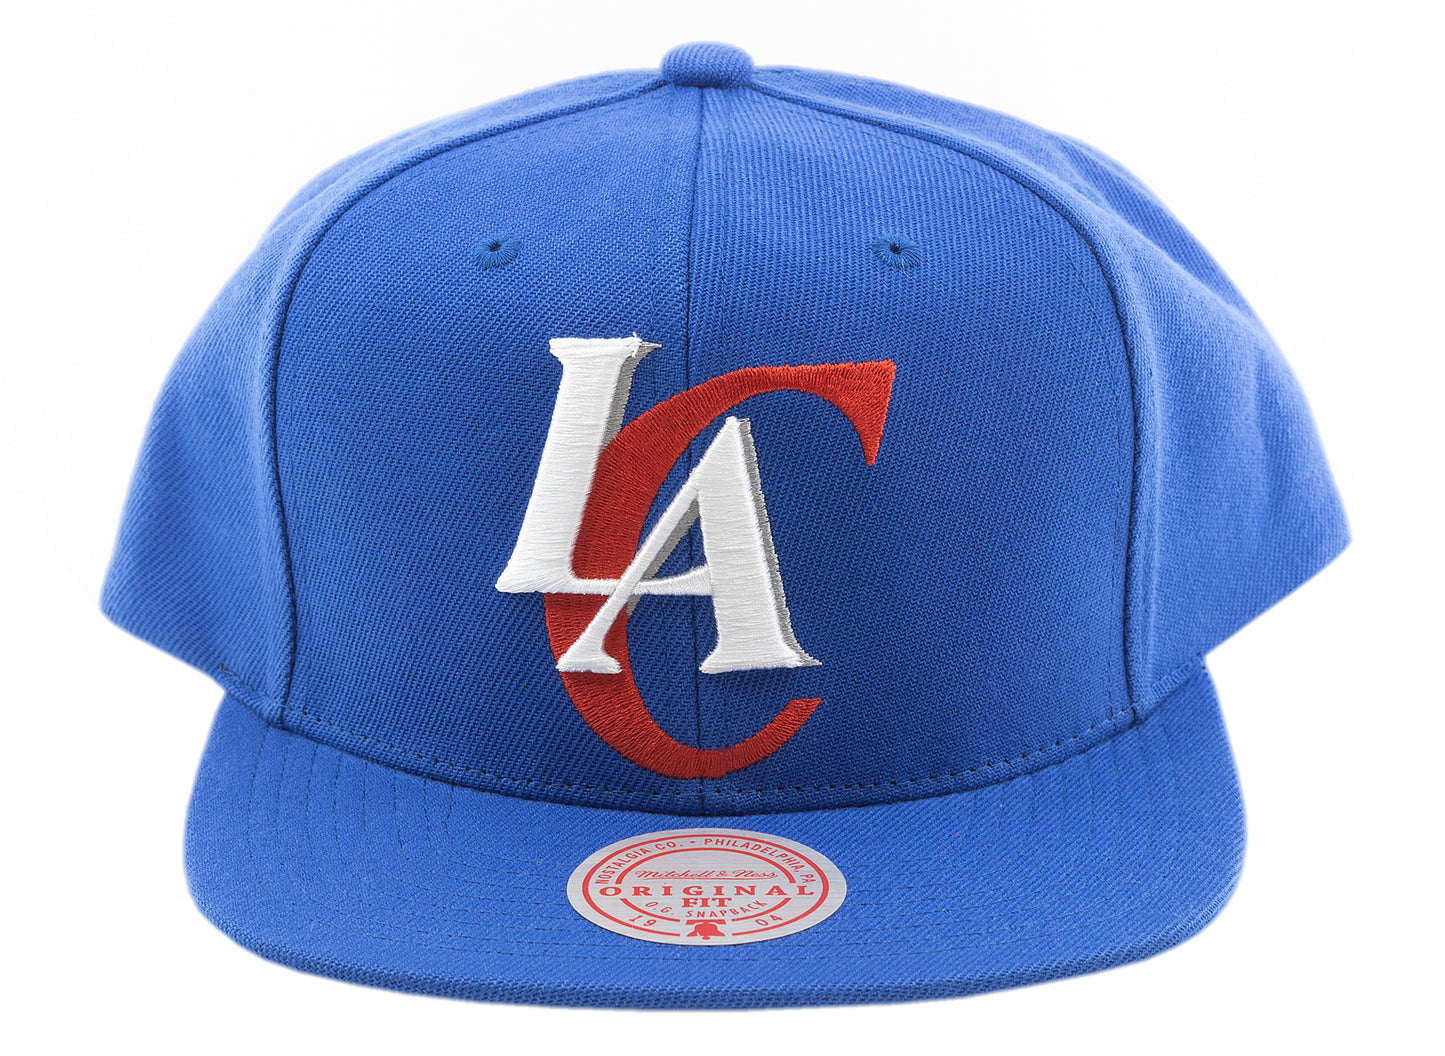 clippers mitchell and ness